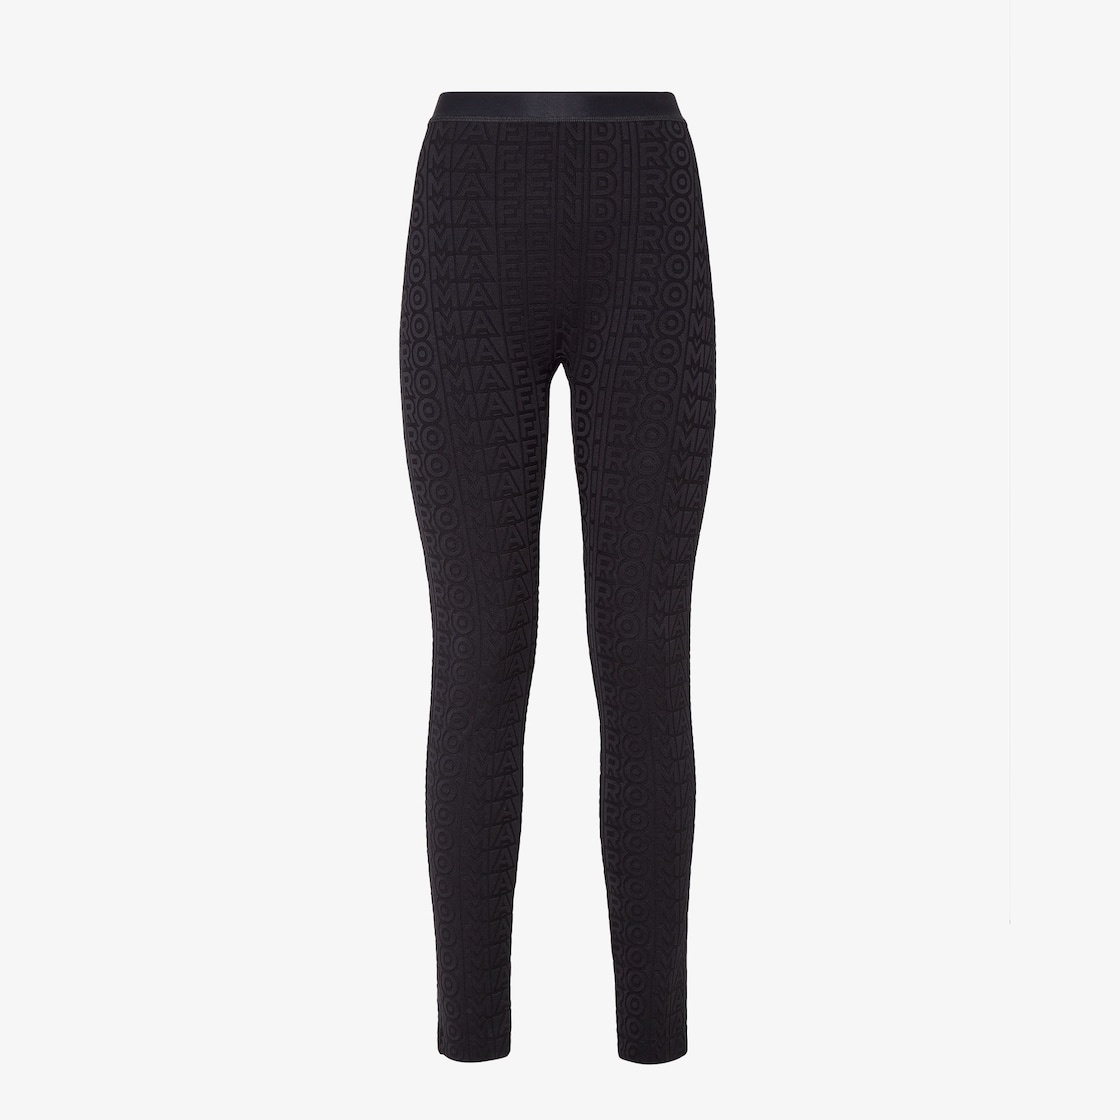 Tight-fitting leggings made of black fabric. The Fendi Roma logo is reinterpreted by Marc Jacobs in  - 1